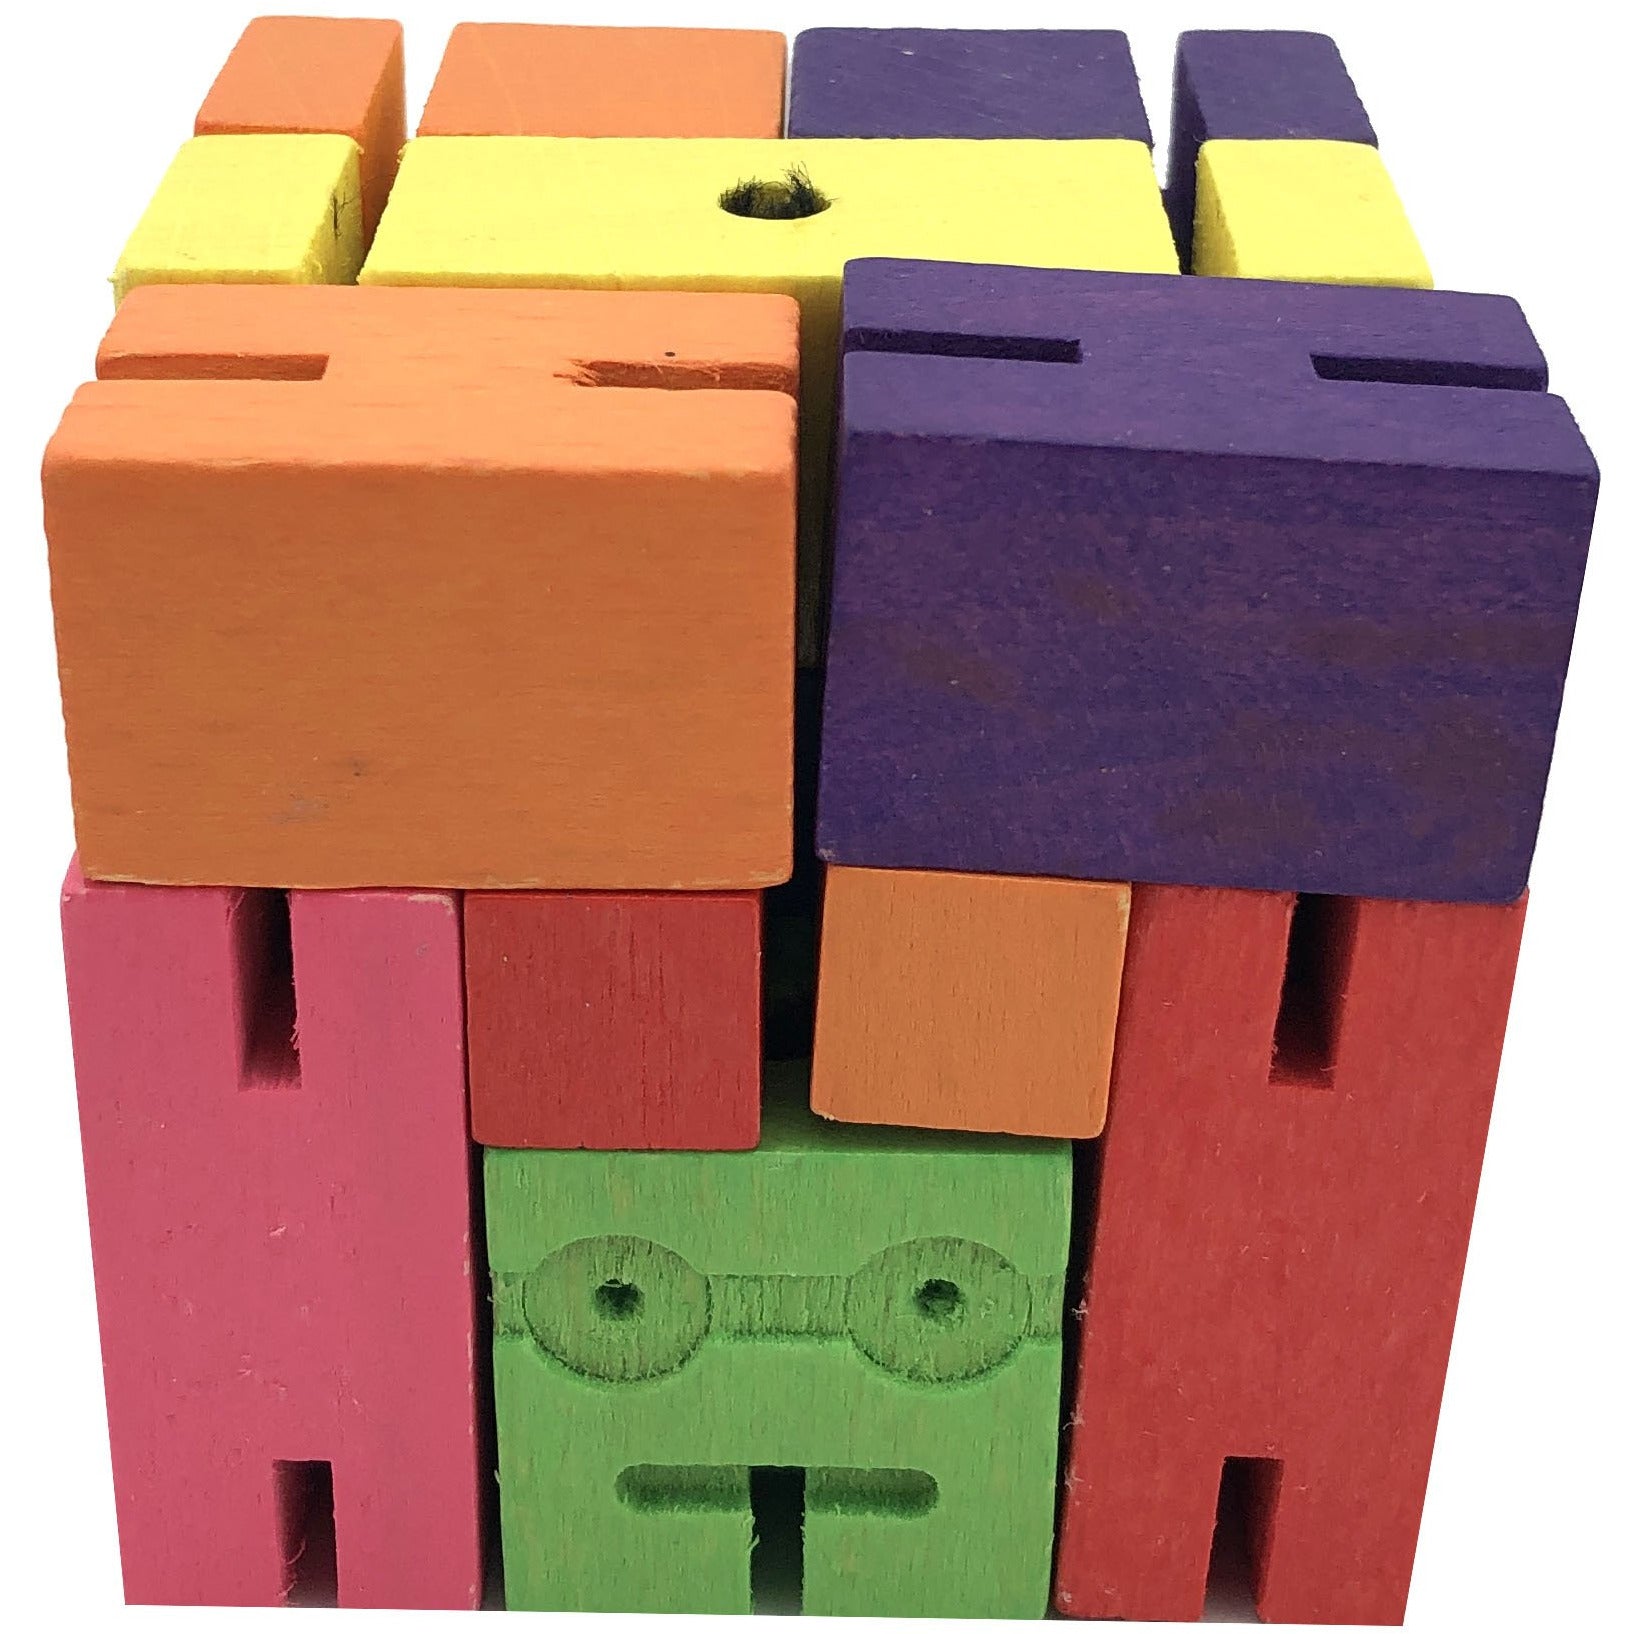 Studio Areaware Micro Cubebot / Wooden Toy Puzzle / Minature Toy / Multicoloured / Toy /